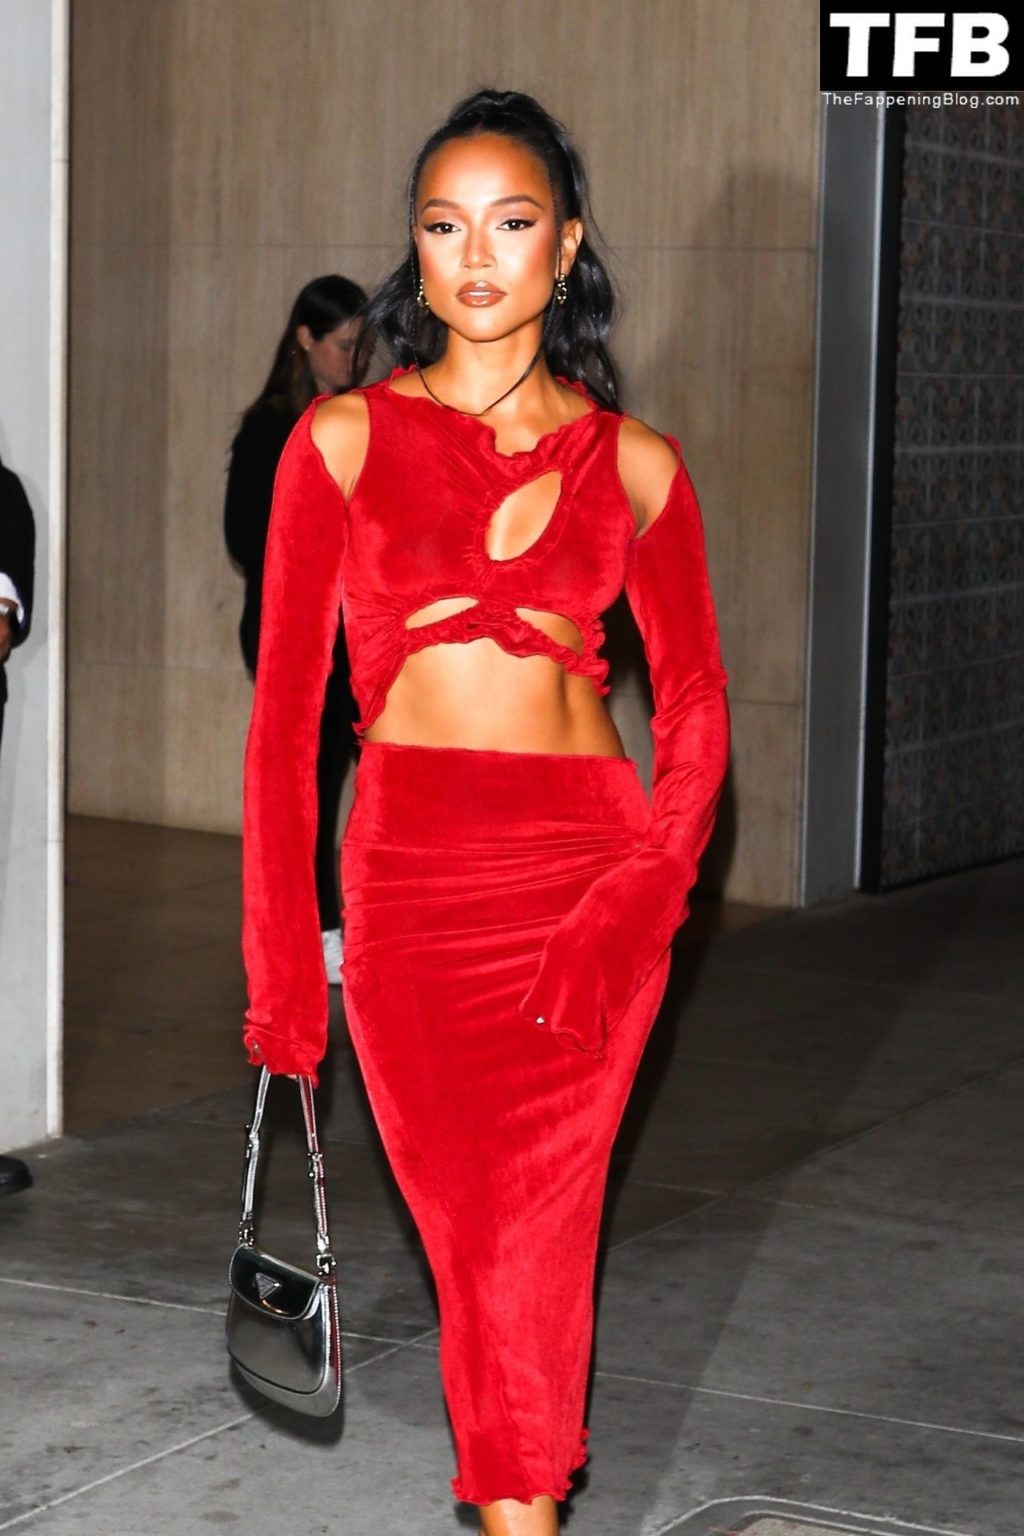 Karrueche Tran Sexy The Fappening Blog 64 1024x1536 - Karrueche Tran Shows Her Pokies in a Red Dress at The Hollywood Reporter’s Oscar Nominees Night (68 Photos)